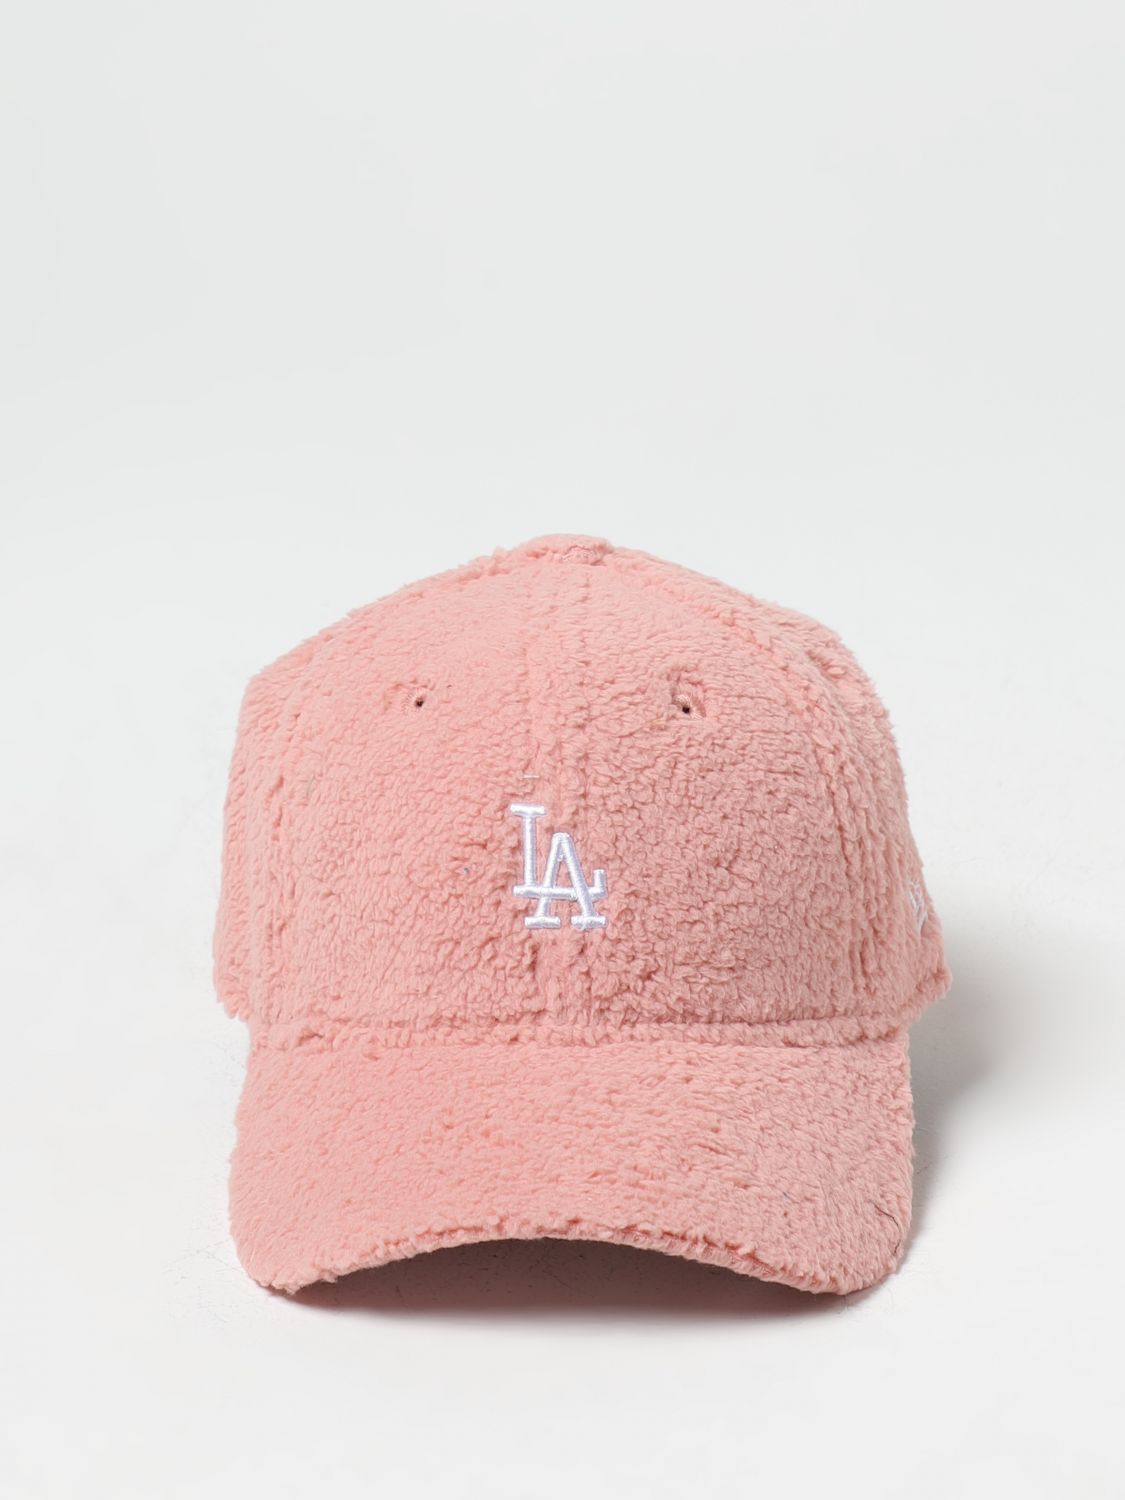 NEW ERA: hat for woman - Pink  New Era hat 60364303 online at